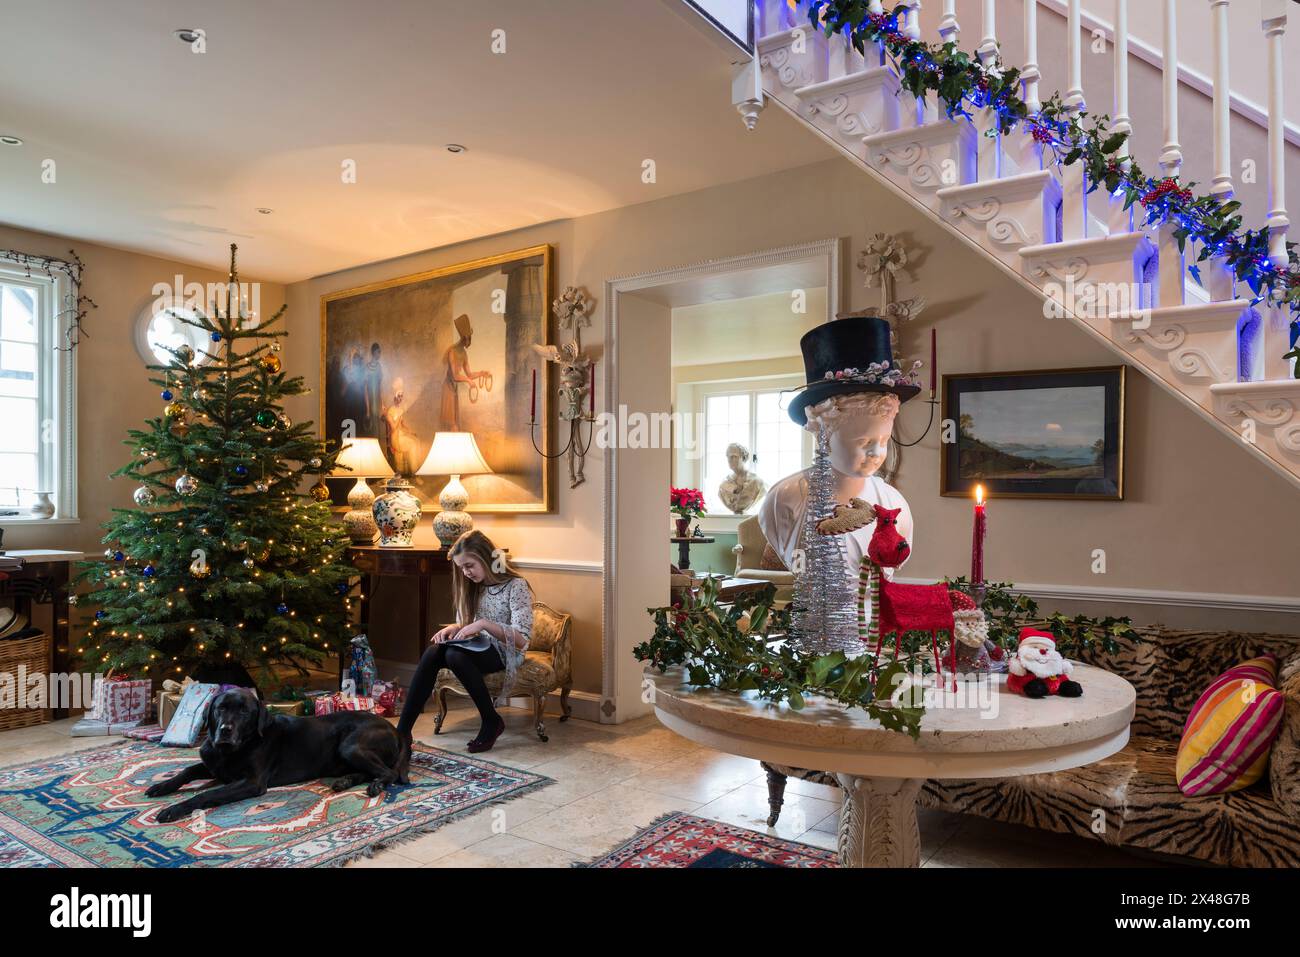 Girl sits with dog and Christmas tree in Dorset family home at Christmas, England, UK Stock Photo